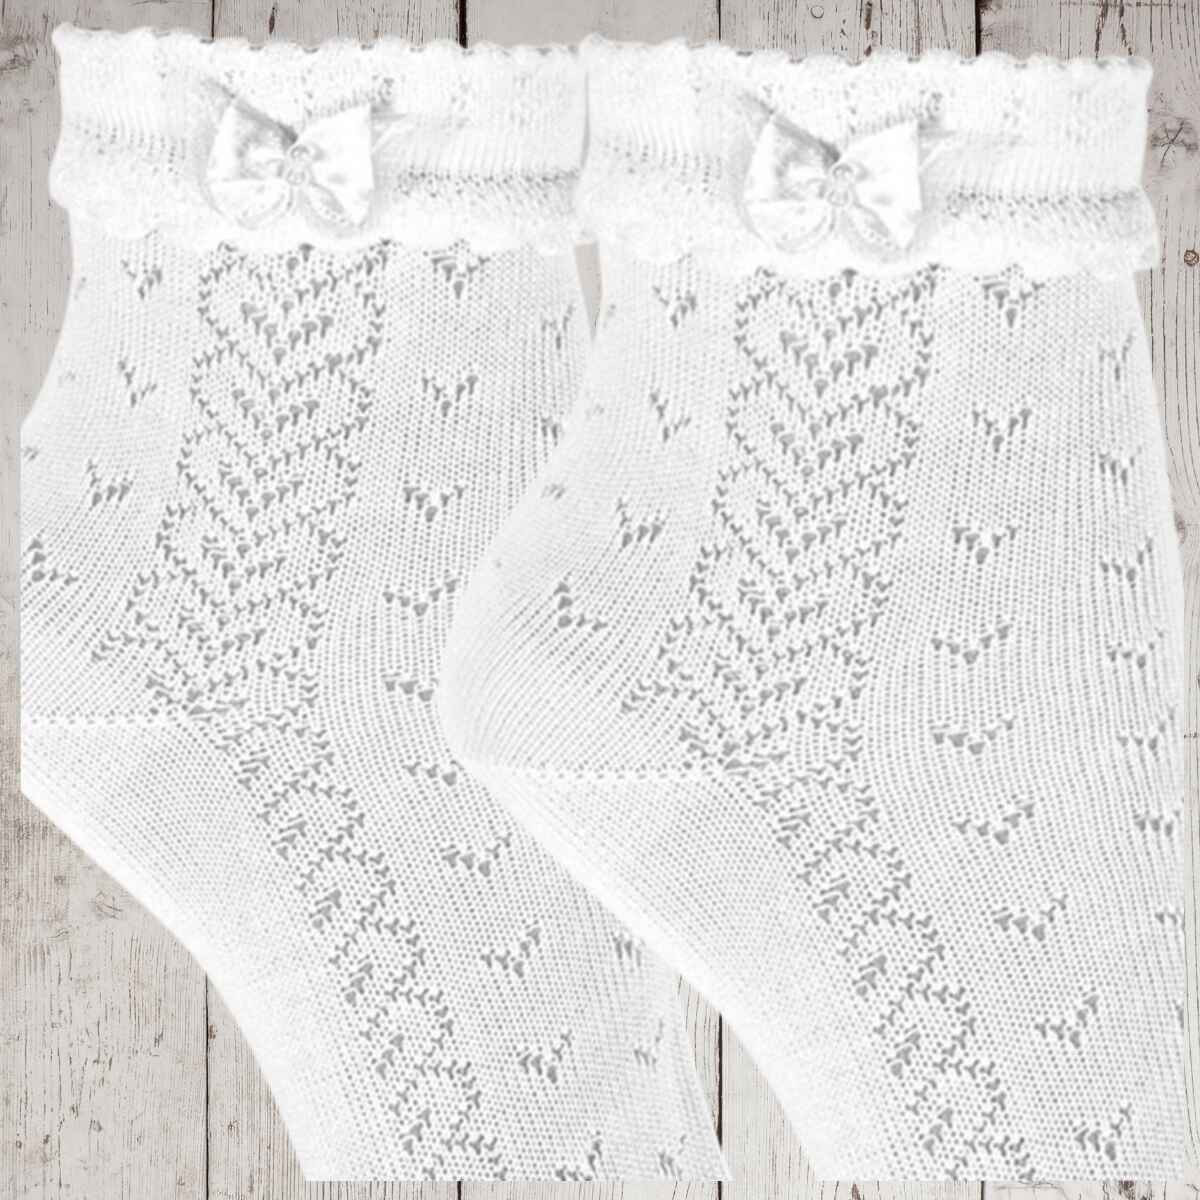 CEREMONY OPENWORK ANKLE SOCKS WITH BOW CONDOR - 2